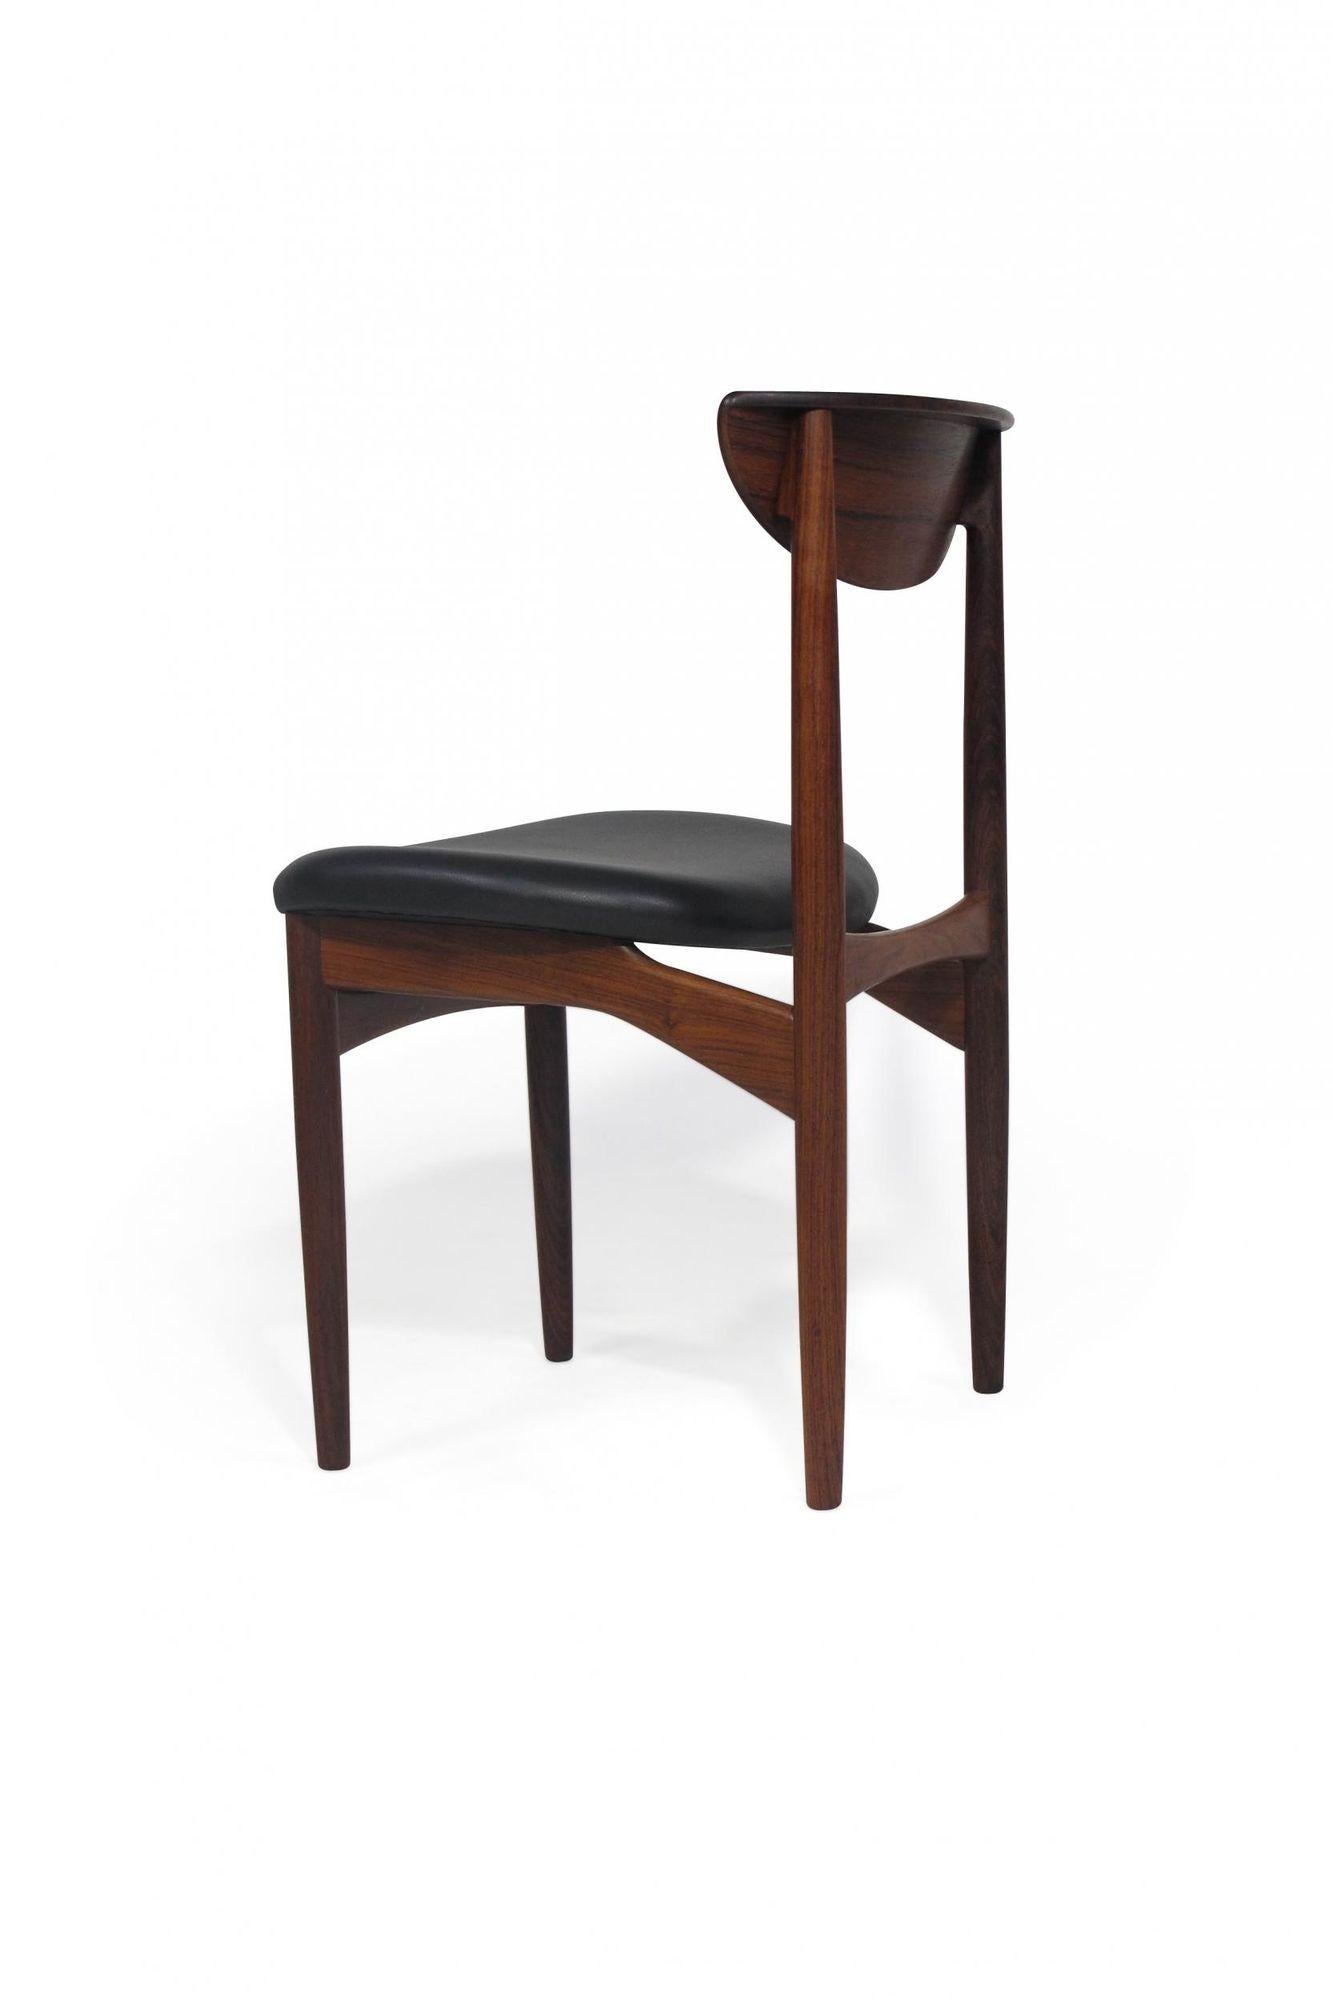 Danish dining chairs designed by Kurt Ostervig for K.P Møbelfabrik, 1959, Denmark. The chairs are handcrafted of solid Brazilian rosewood frames with sculpted backrests.Newly upholstered in black leather. The wood used is of the finest rosewood,